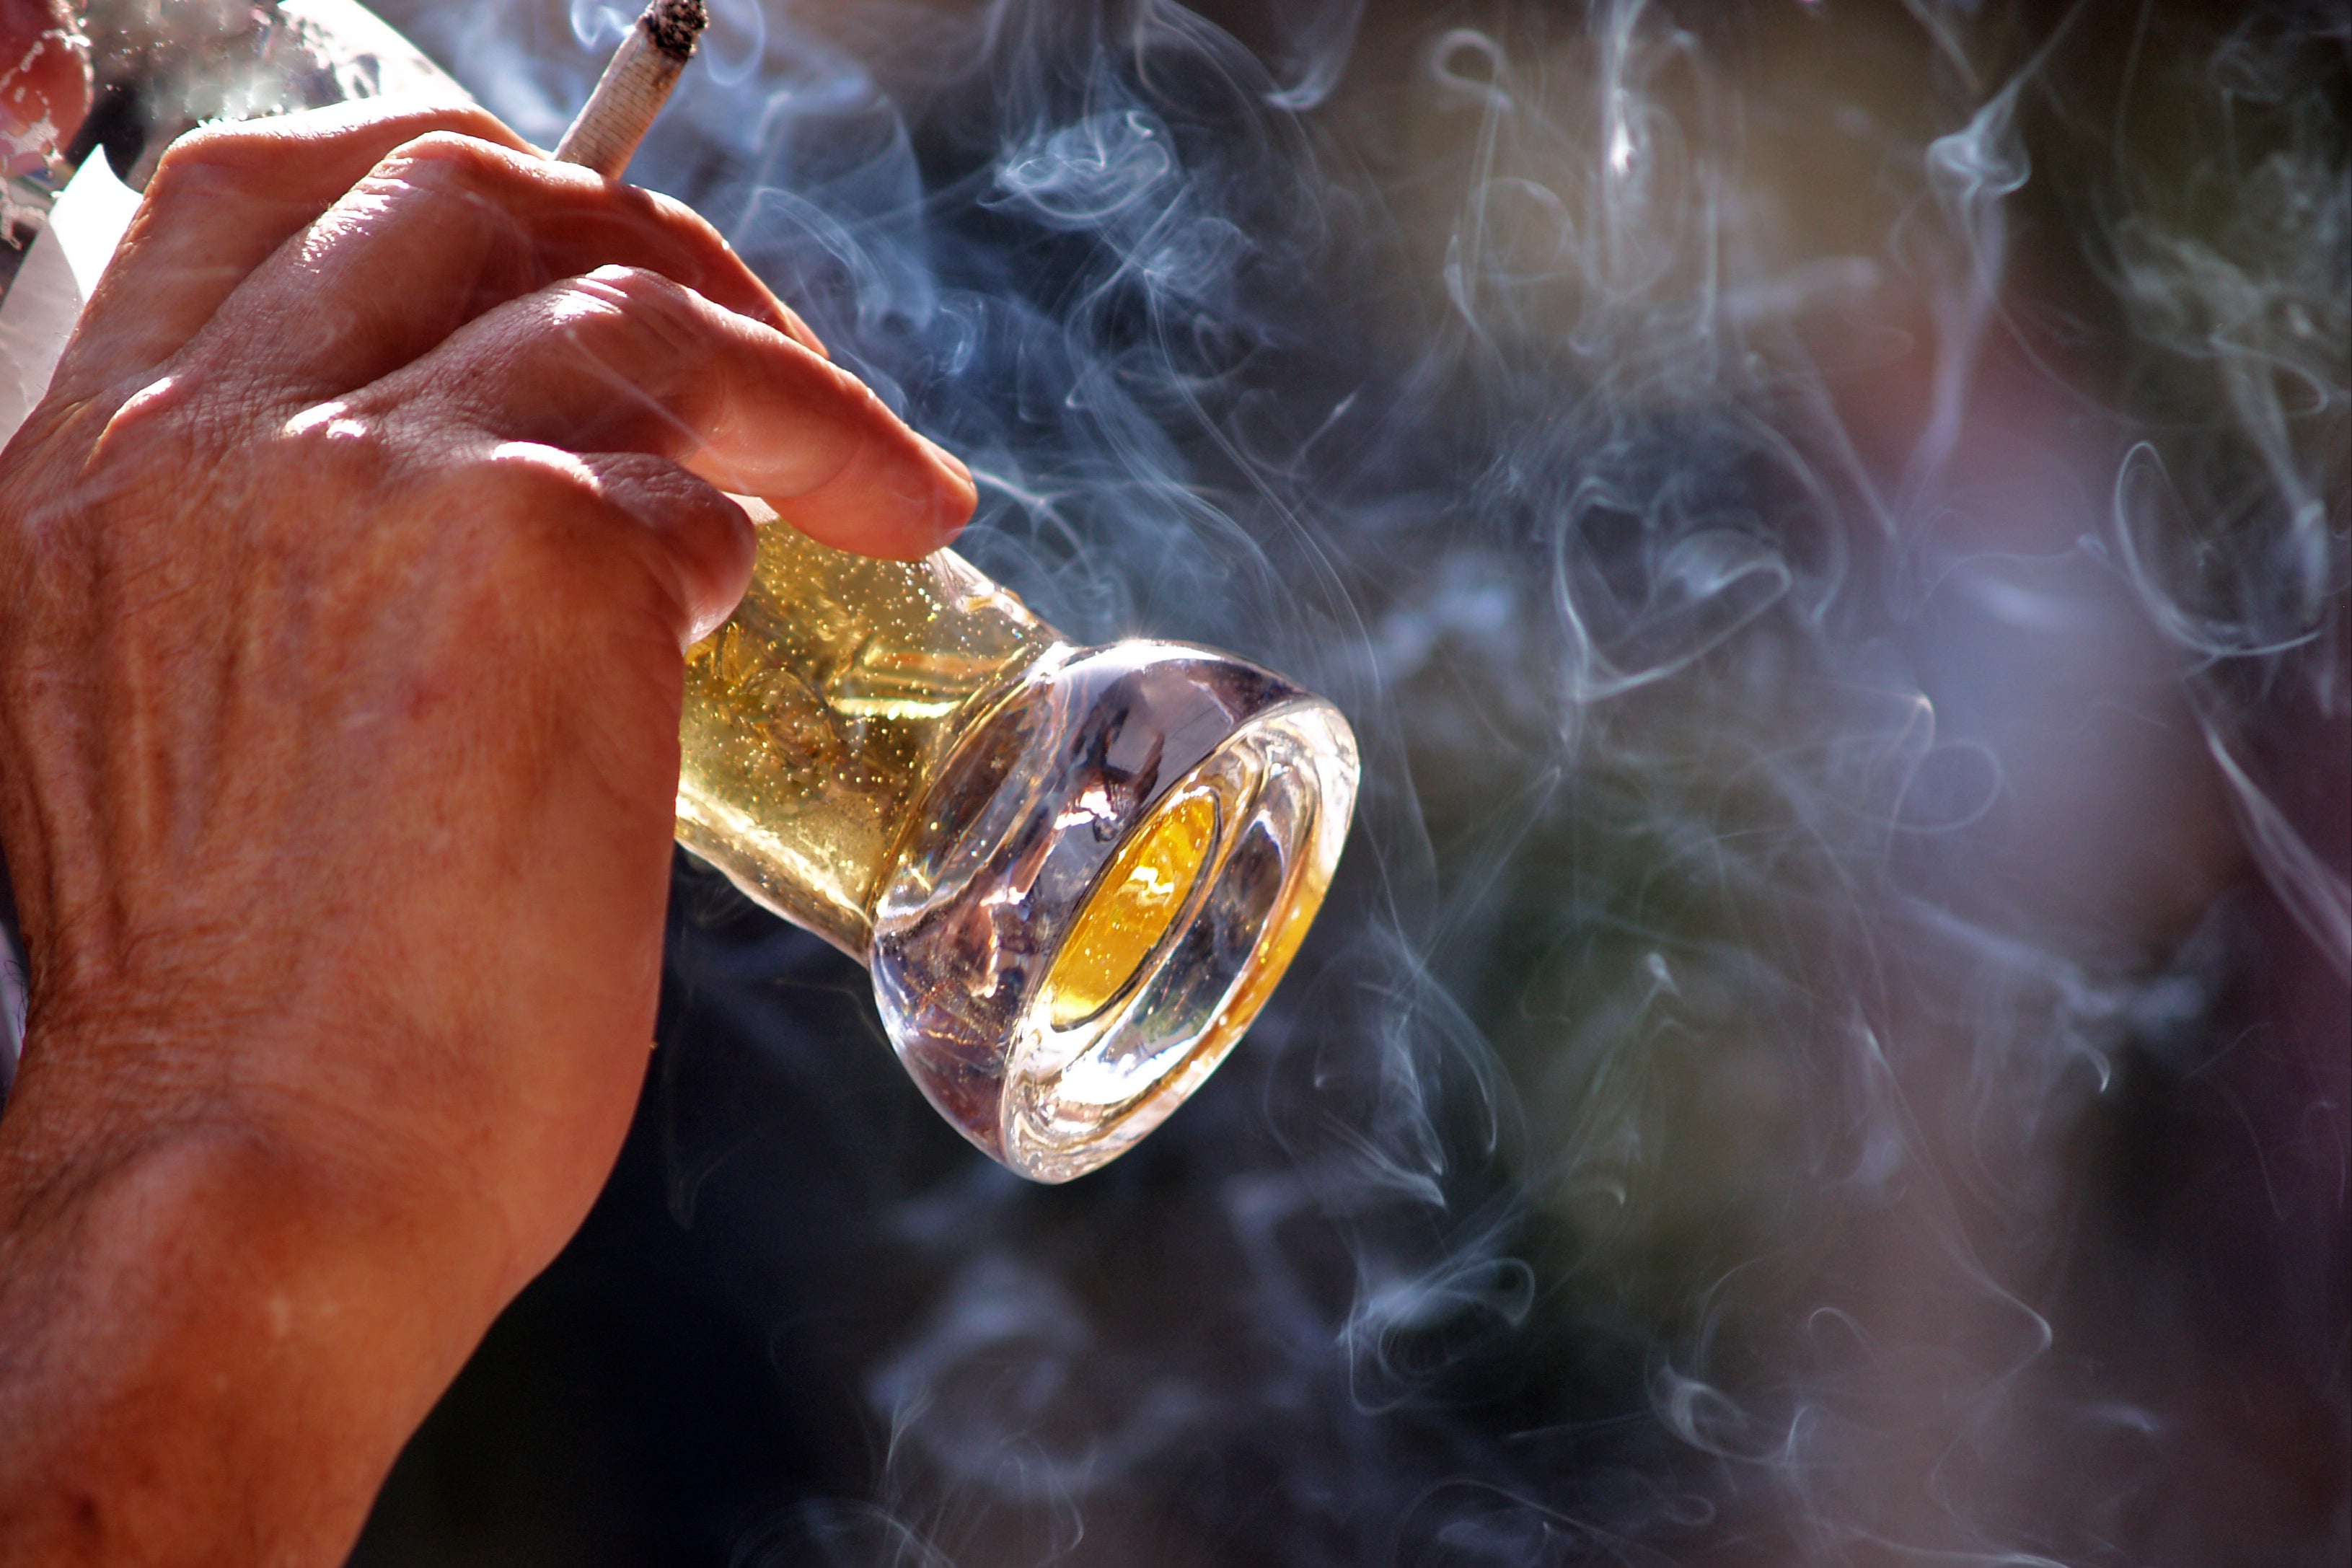 Smoking could be banned at outdoor bar and restaurant terraces